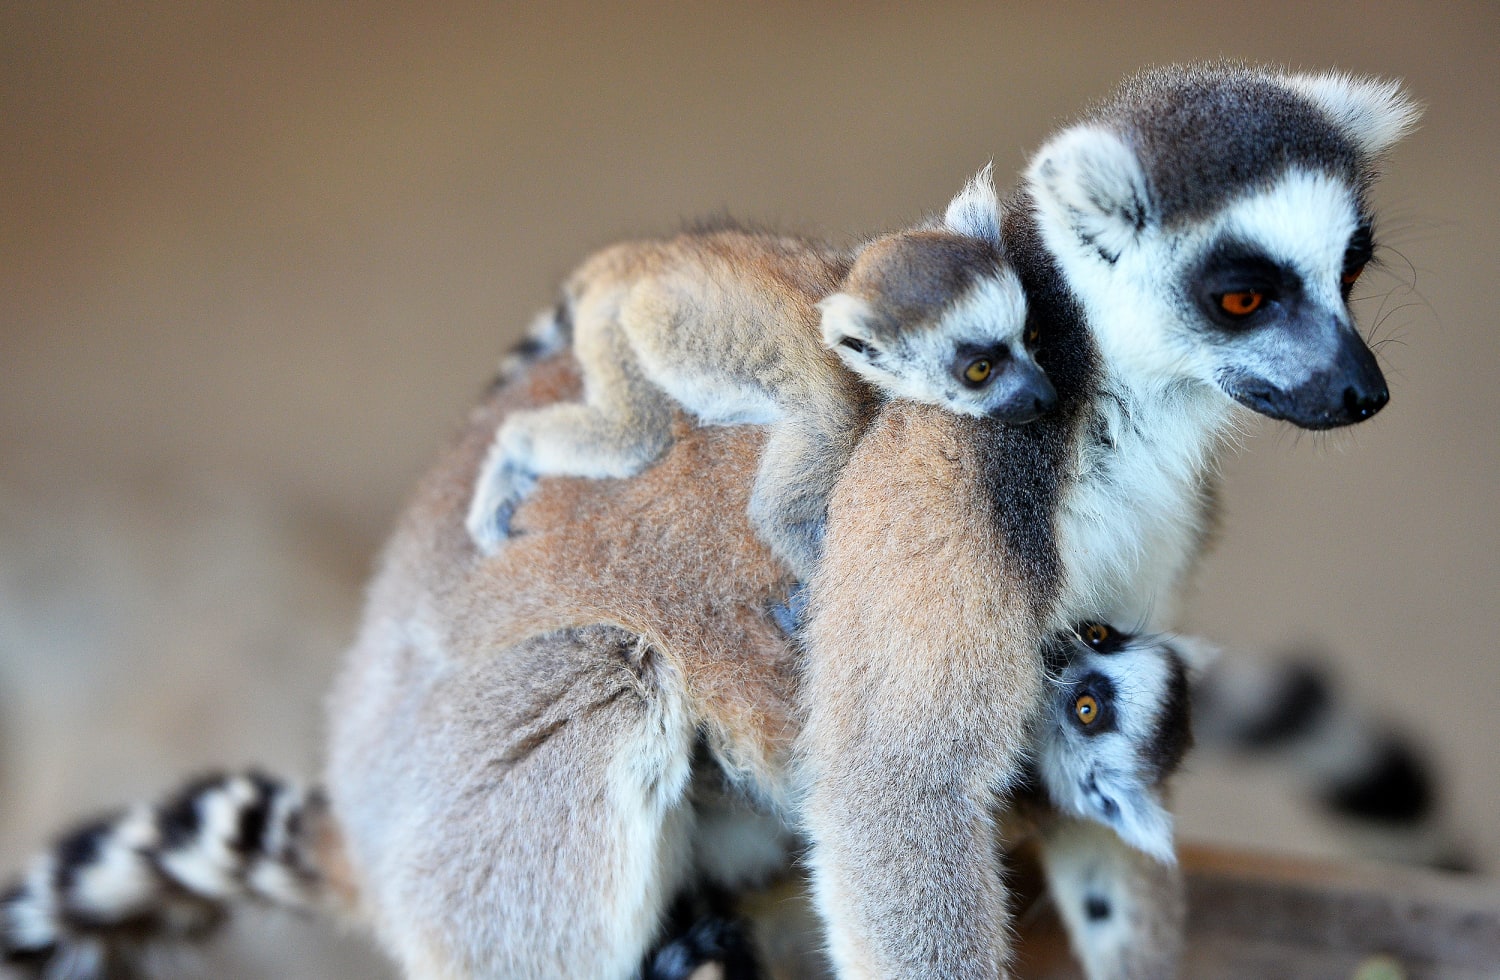 Moms of the animal kingdom (and their babies)